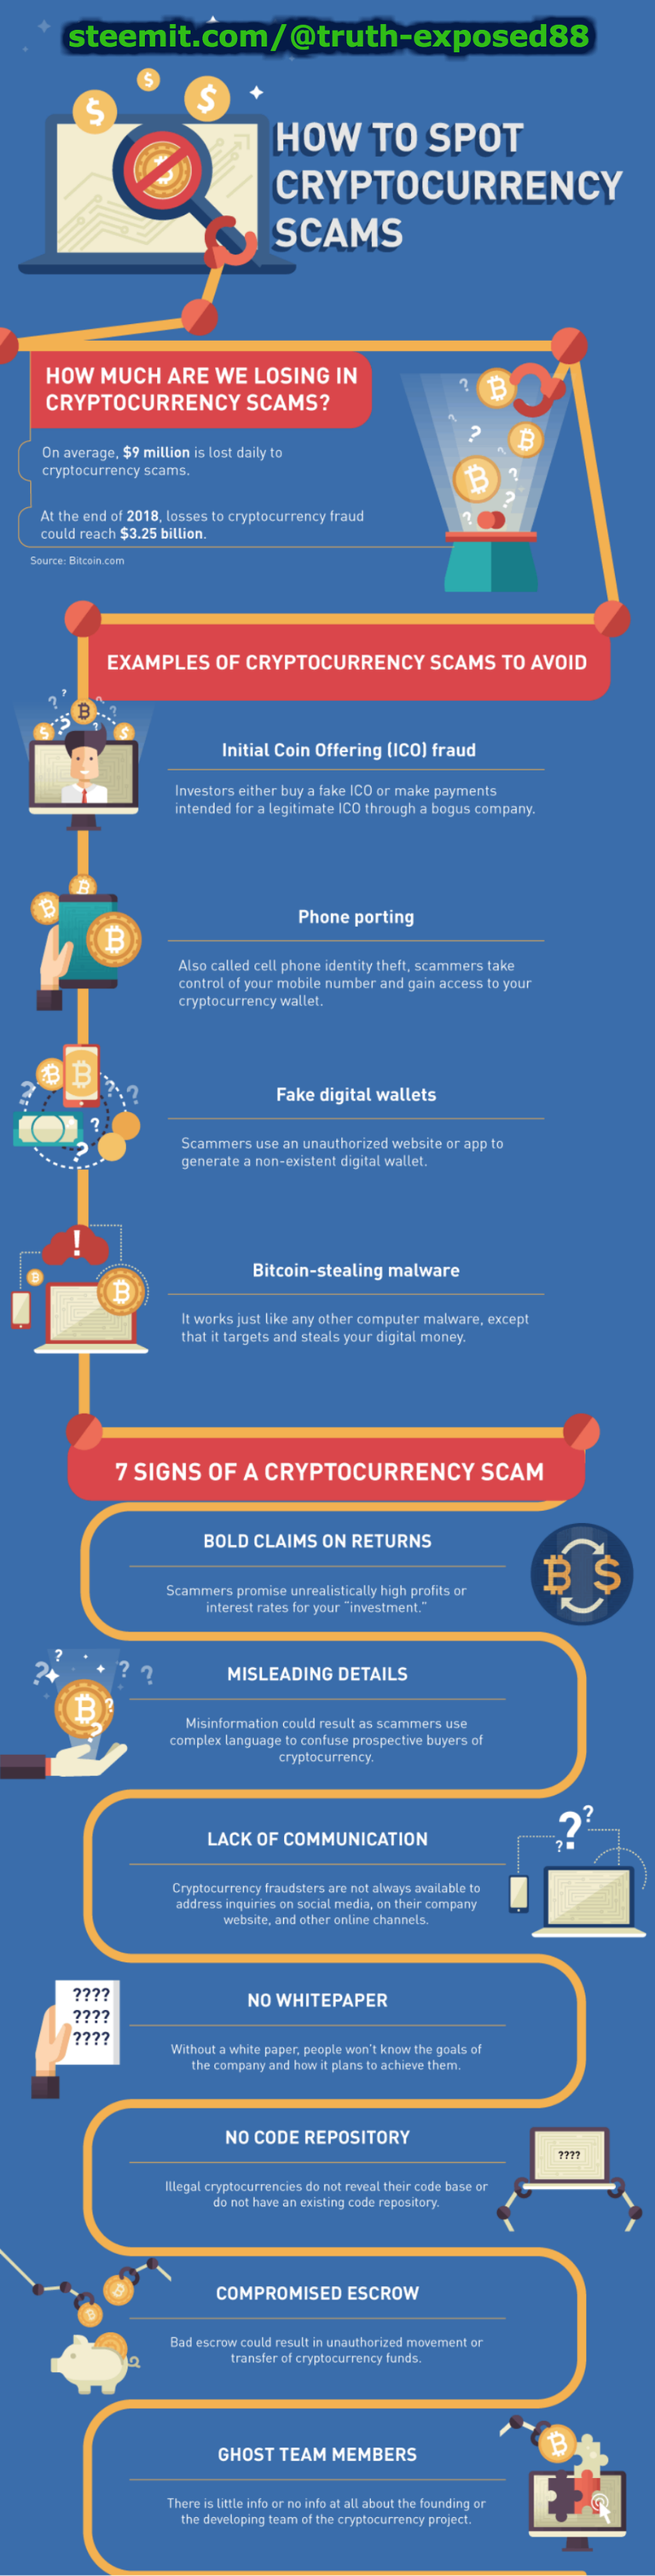 How-to-Spot-Cryptocurrency-Scams-Infographic.png